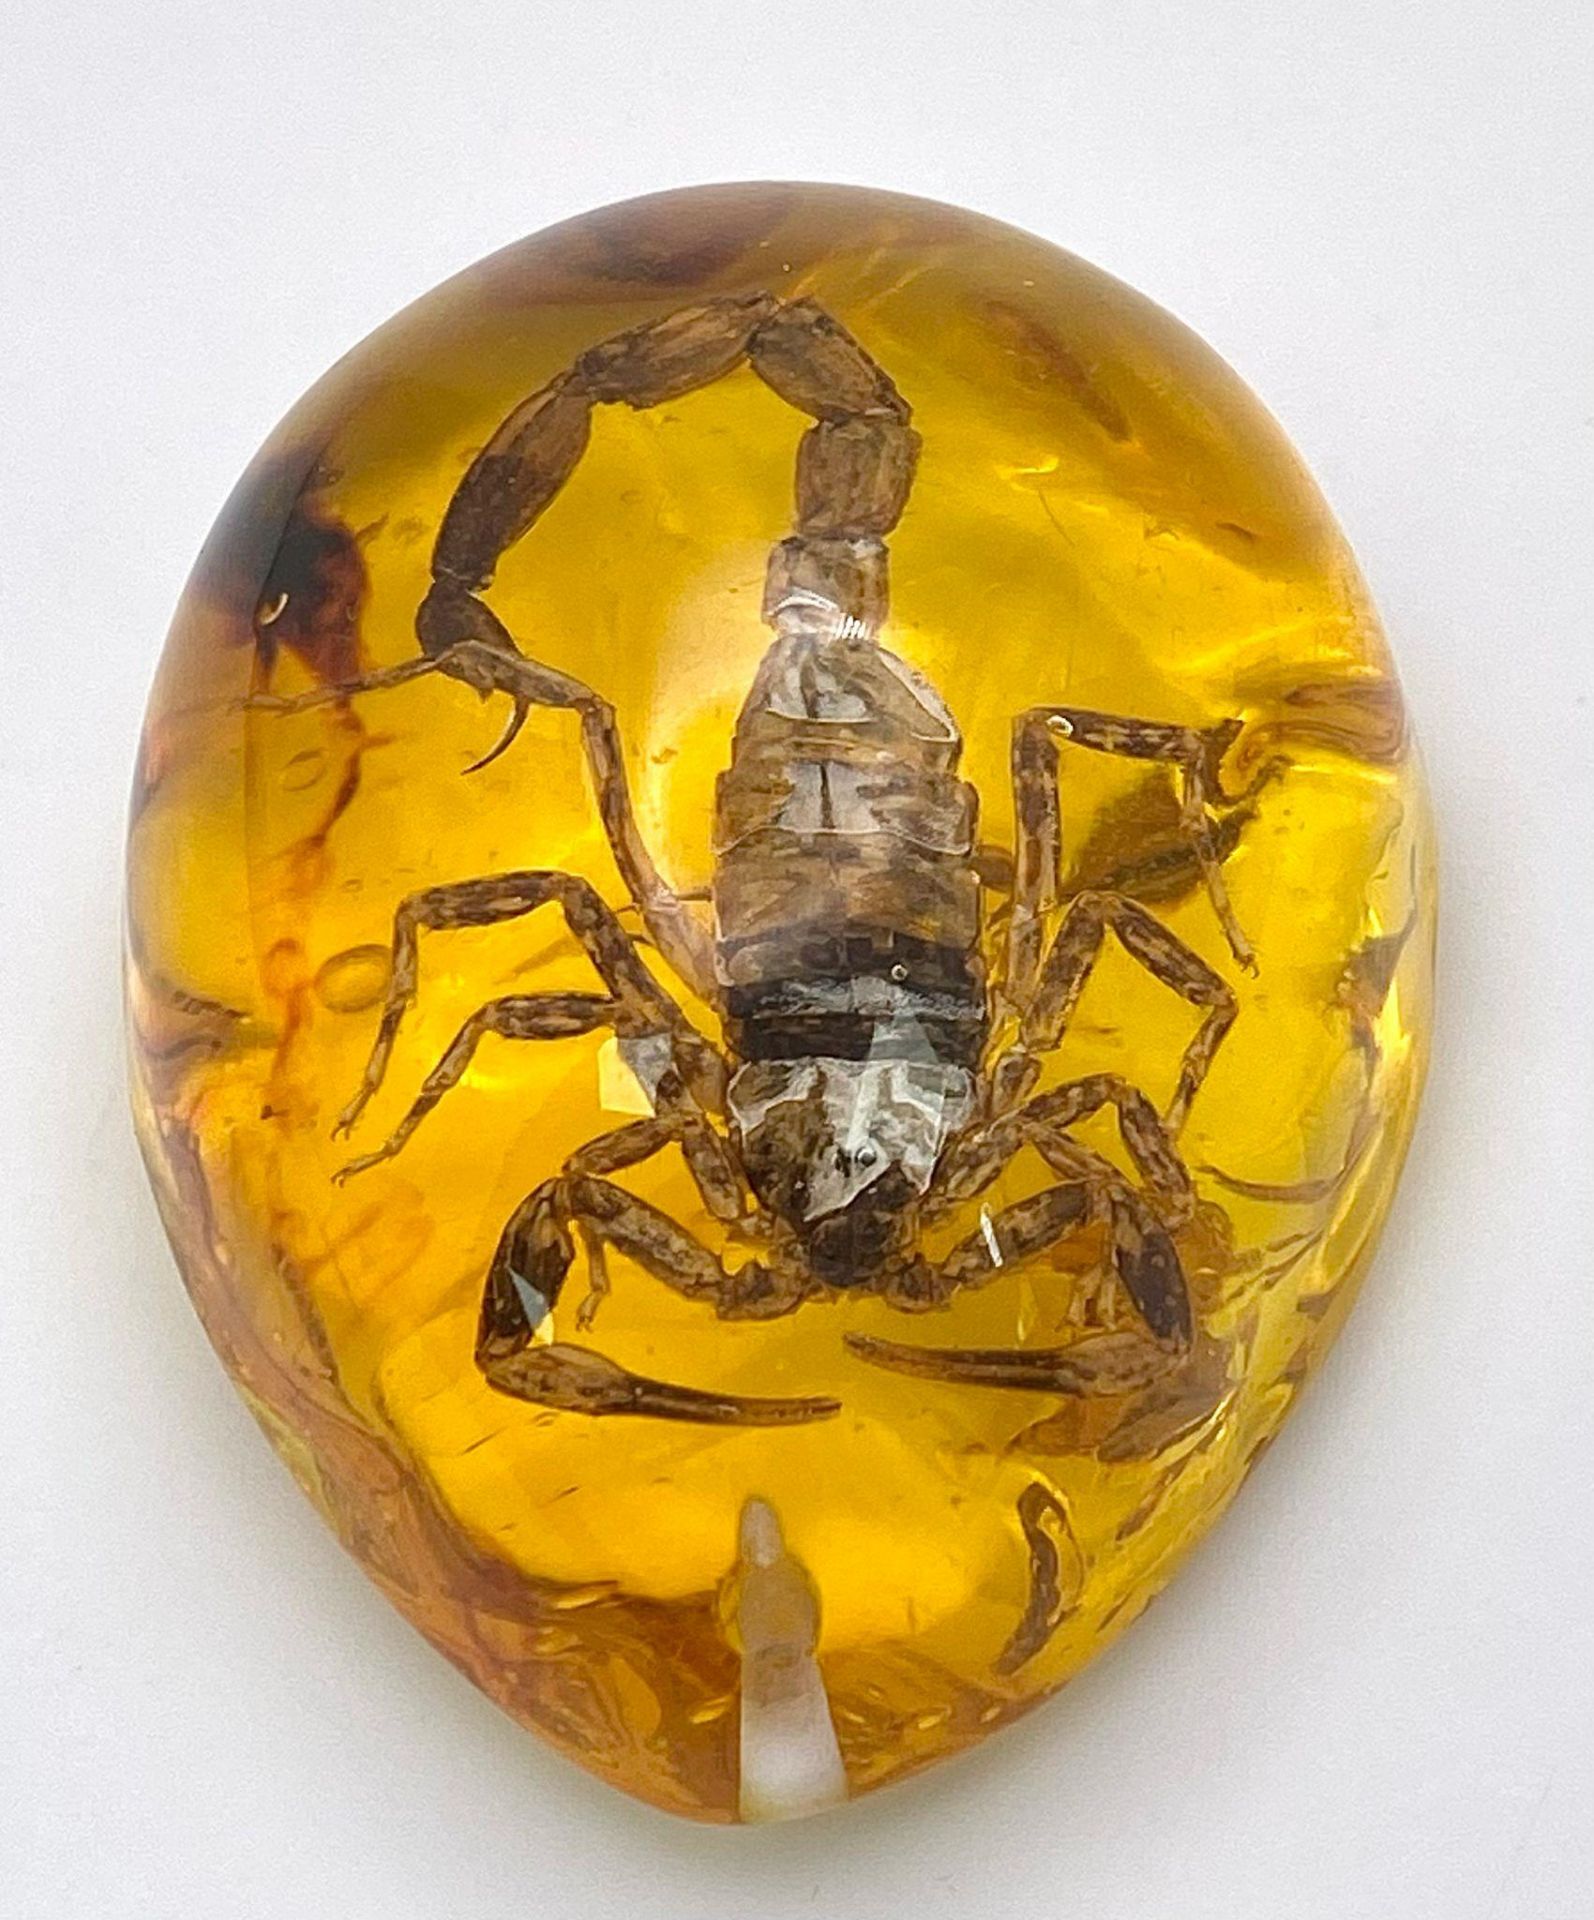 A Scorpion that is Not Concerned with WW3. Amber resin - pendant or paperweight. 6cm. - Bild 3 aus 5